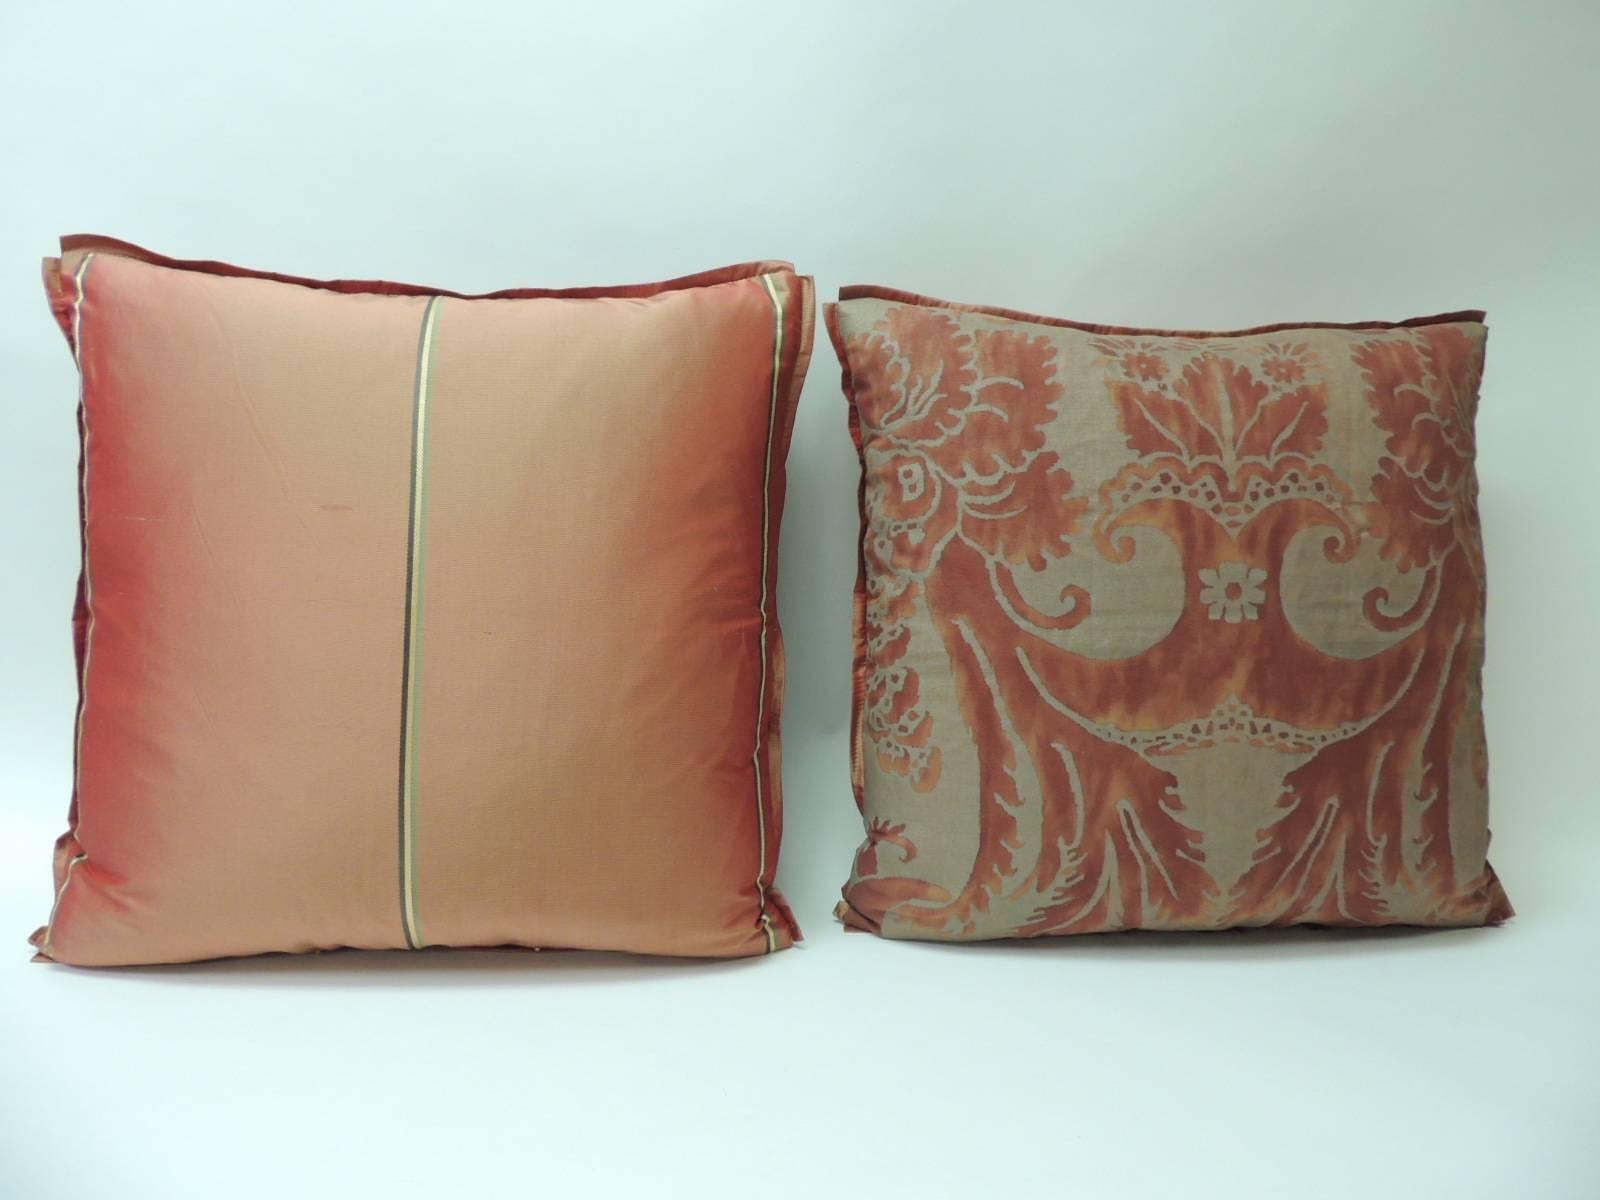 Italian Pair of Vintage Fortuny “Glicine” Pattern Red and Silvery Decorative Pillows